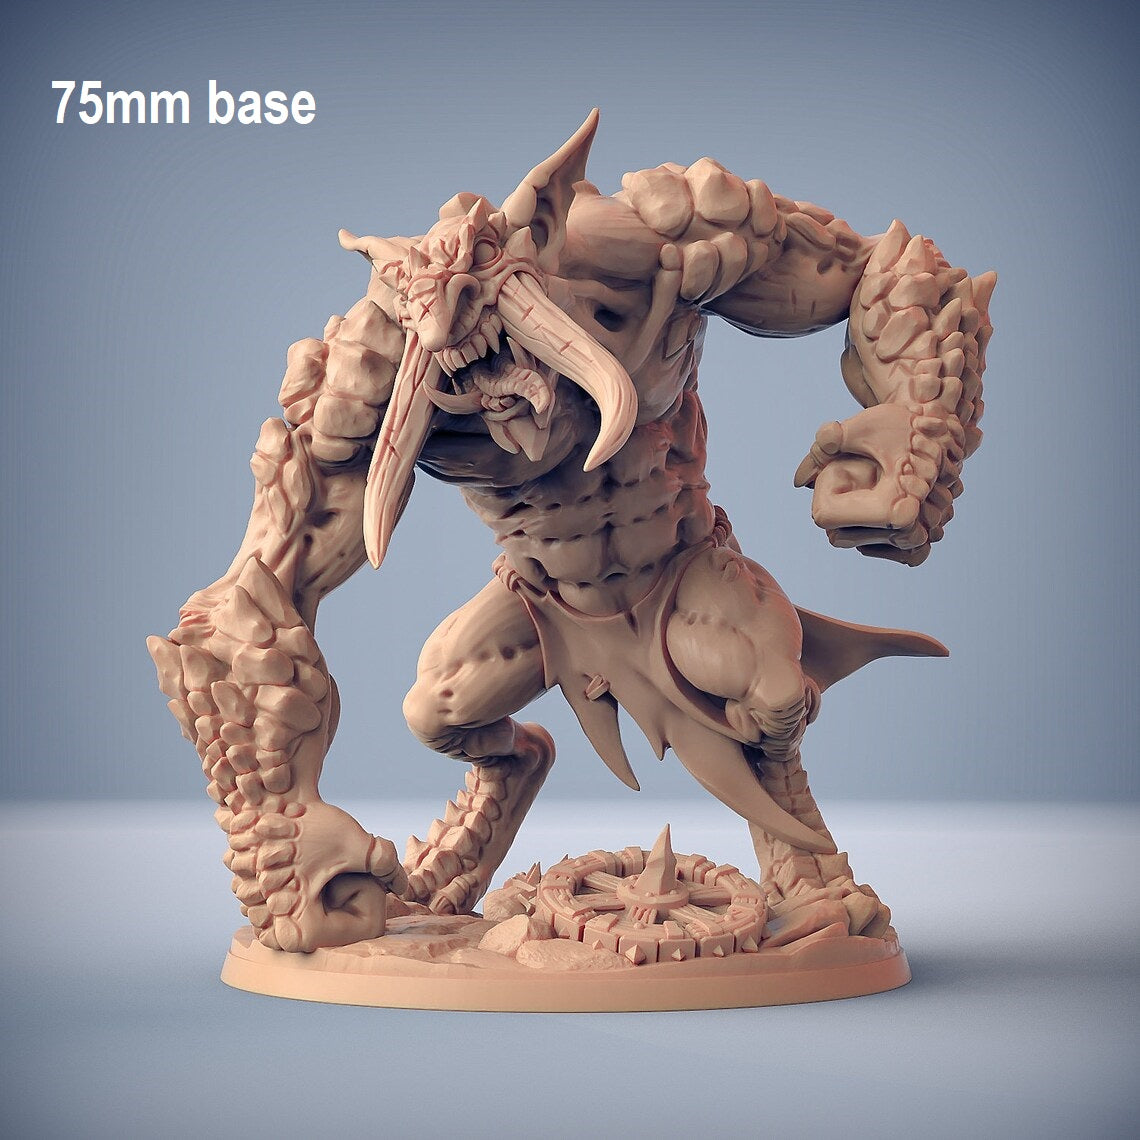 Image shows an 3D render of a rock troll gaming miniature